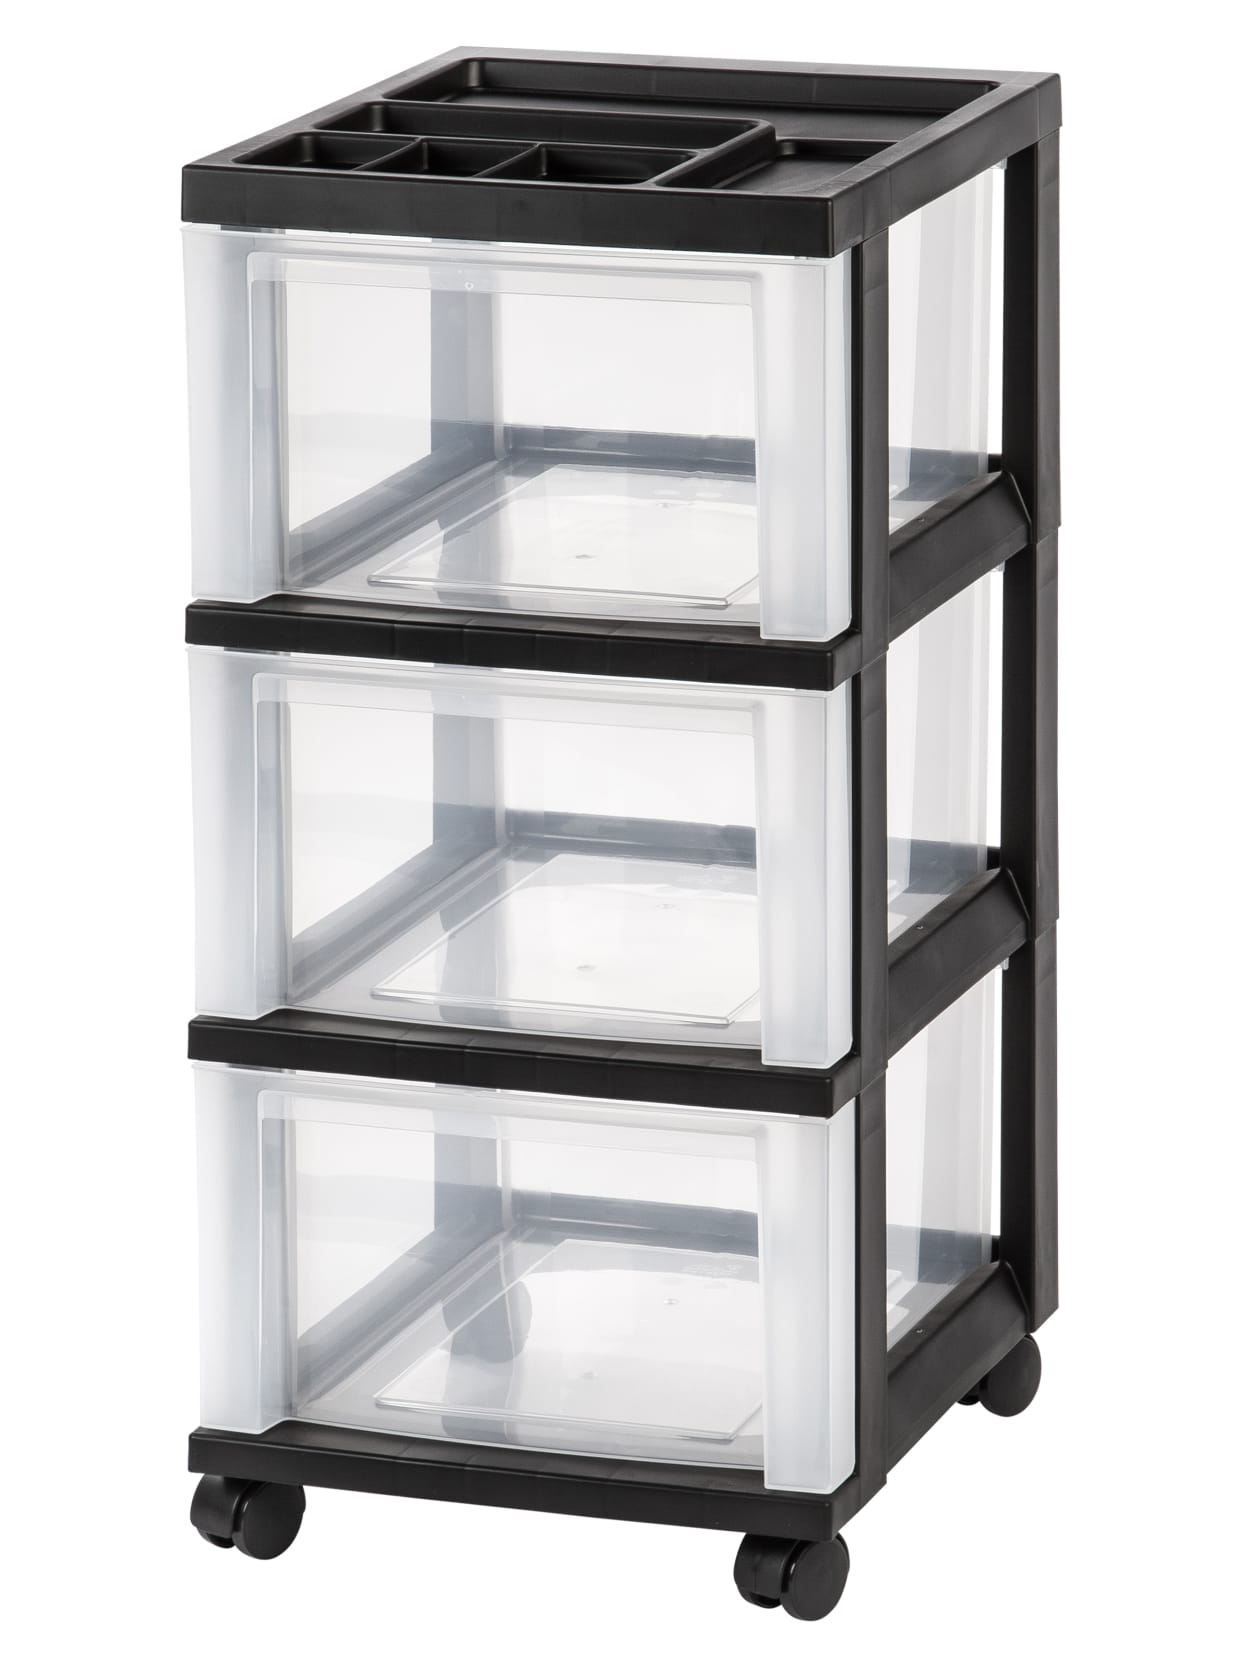 Clearview Craft Storage Containers Bins Black Frame Black Frame /& Clear Storage Drawers 5-Drawer Rolling Storage Cart on Wheels